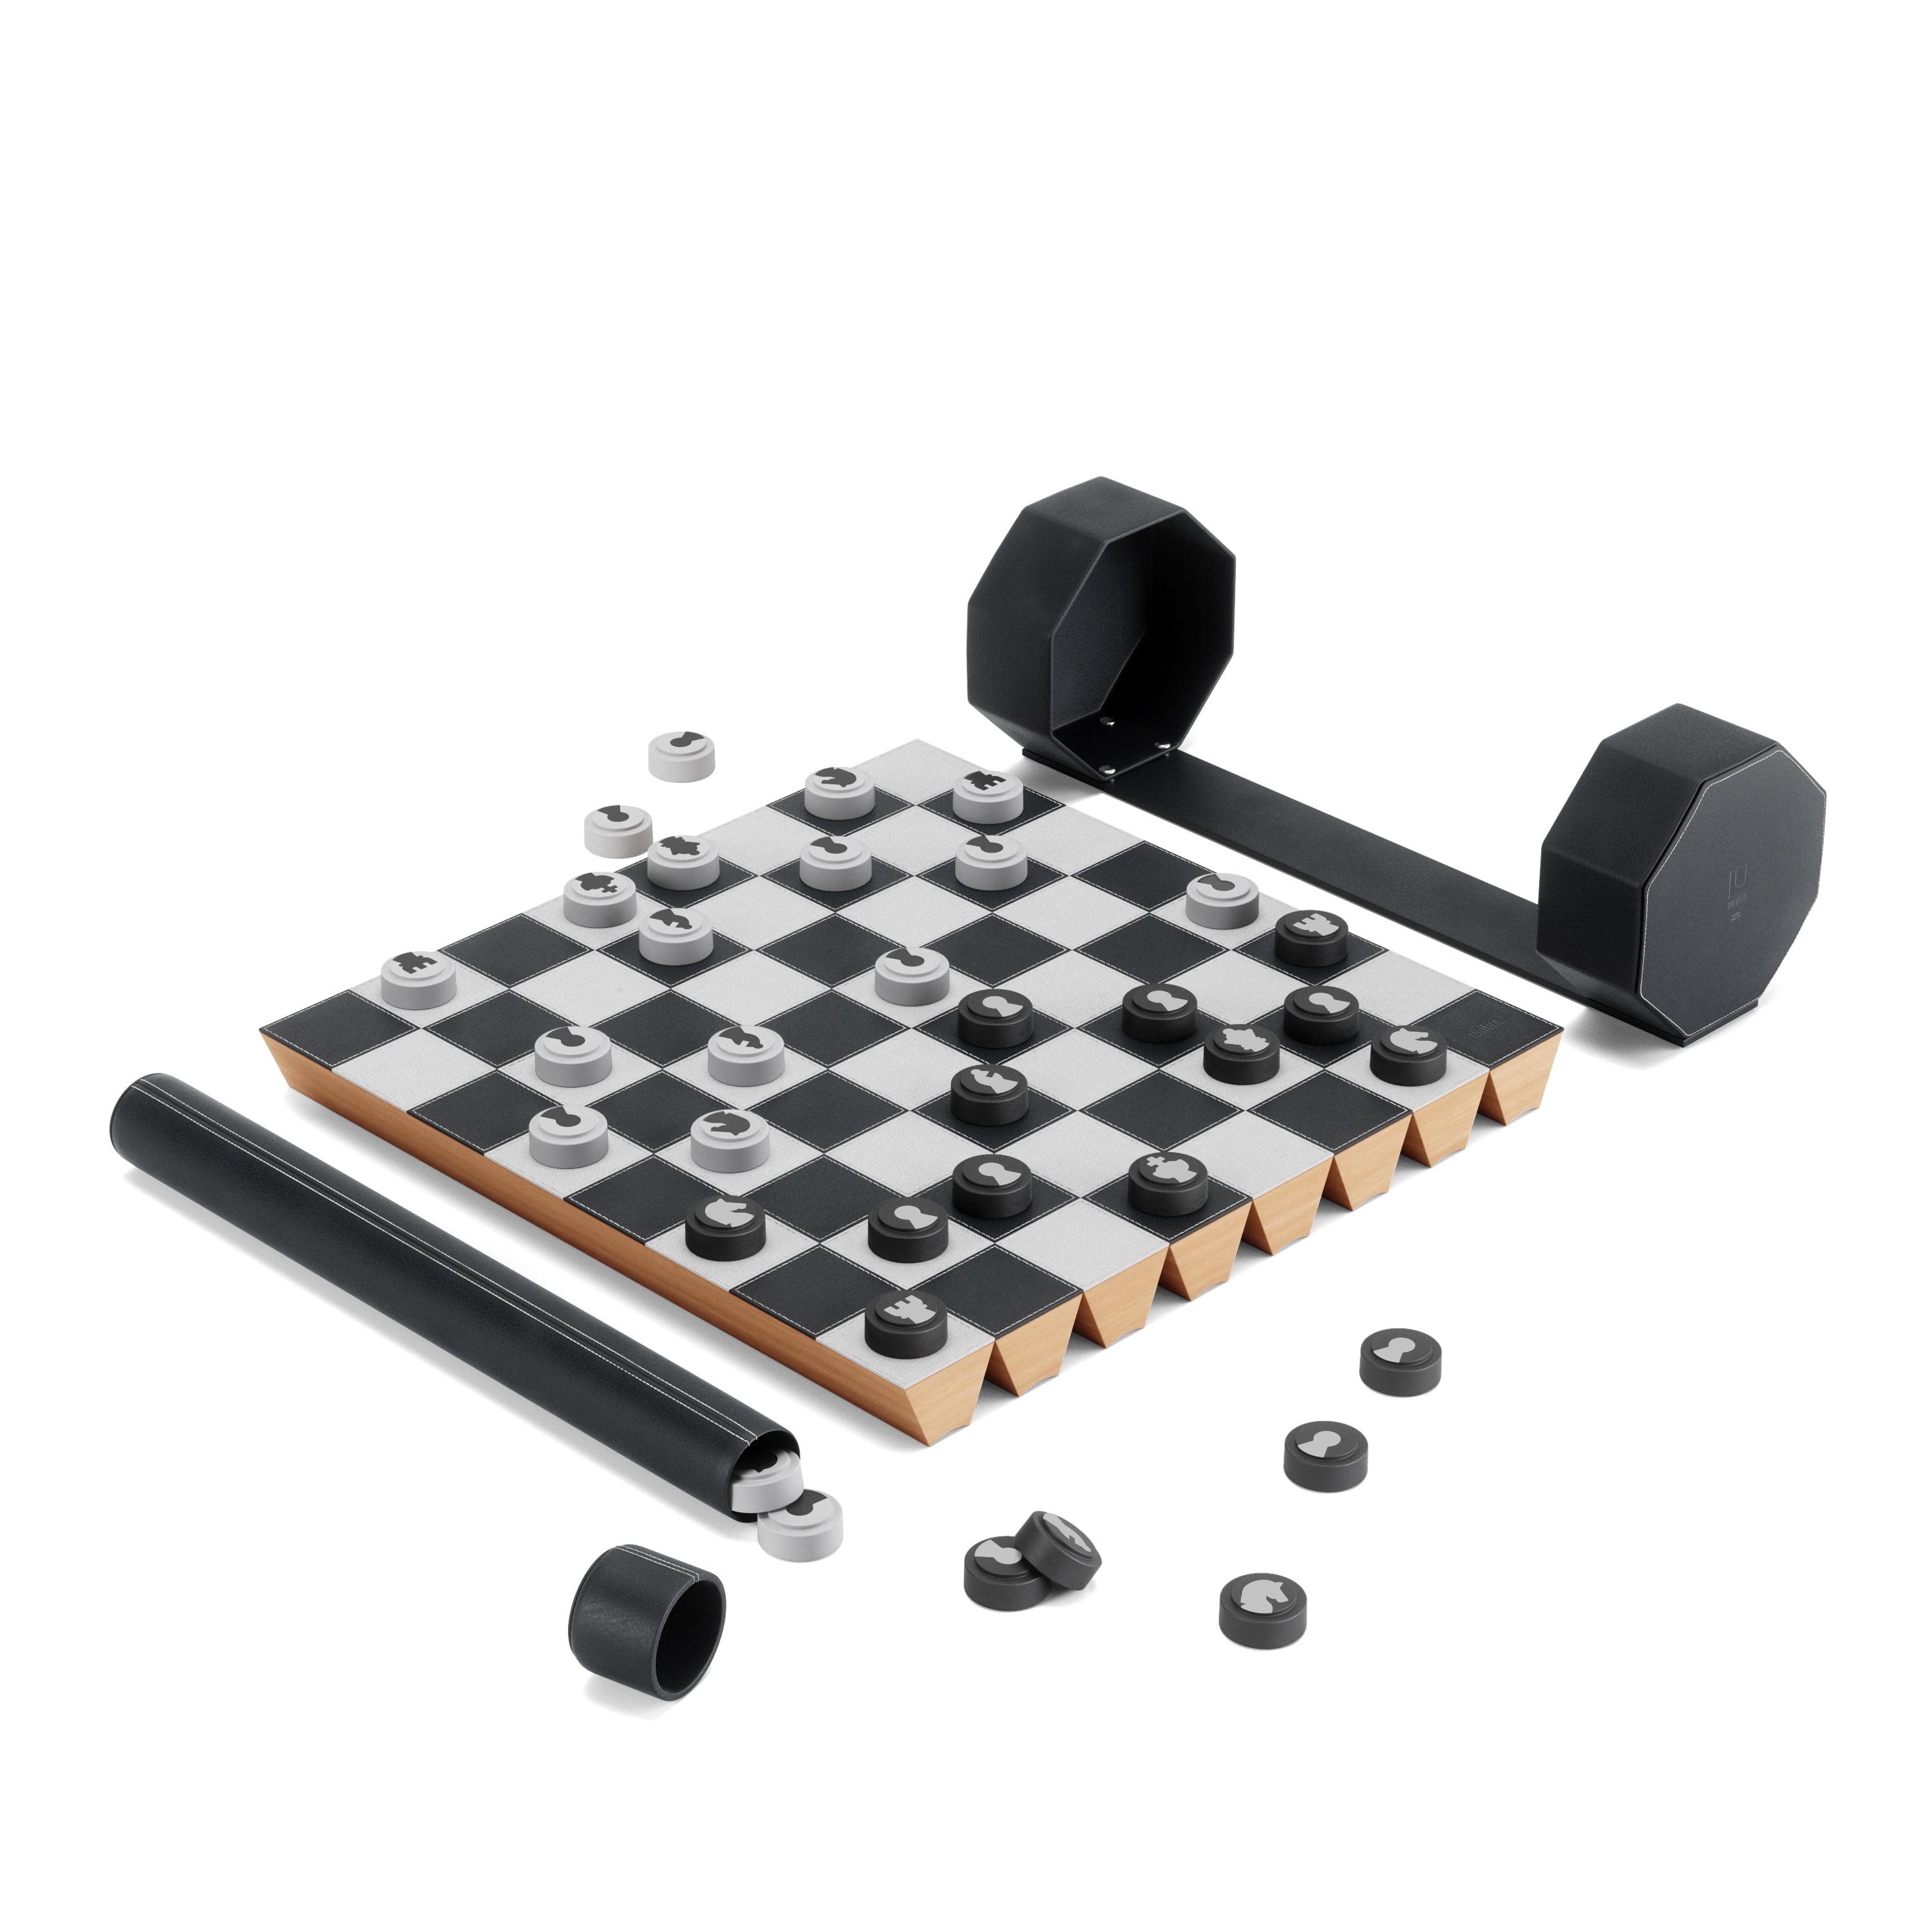 Giros Play Classic Chess & Checkers Silver